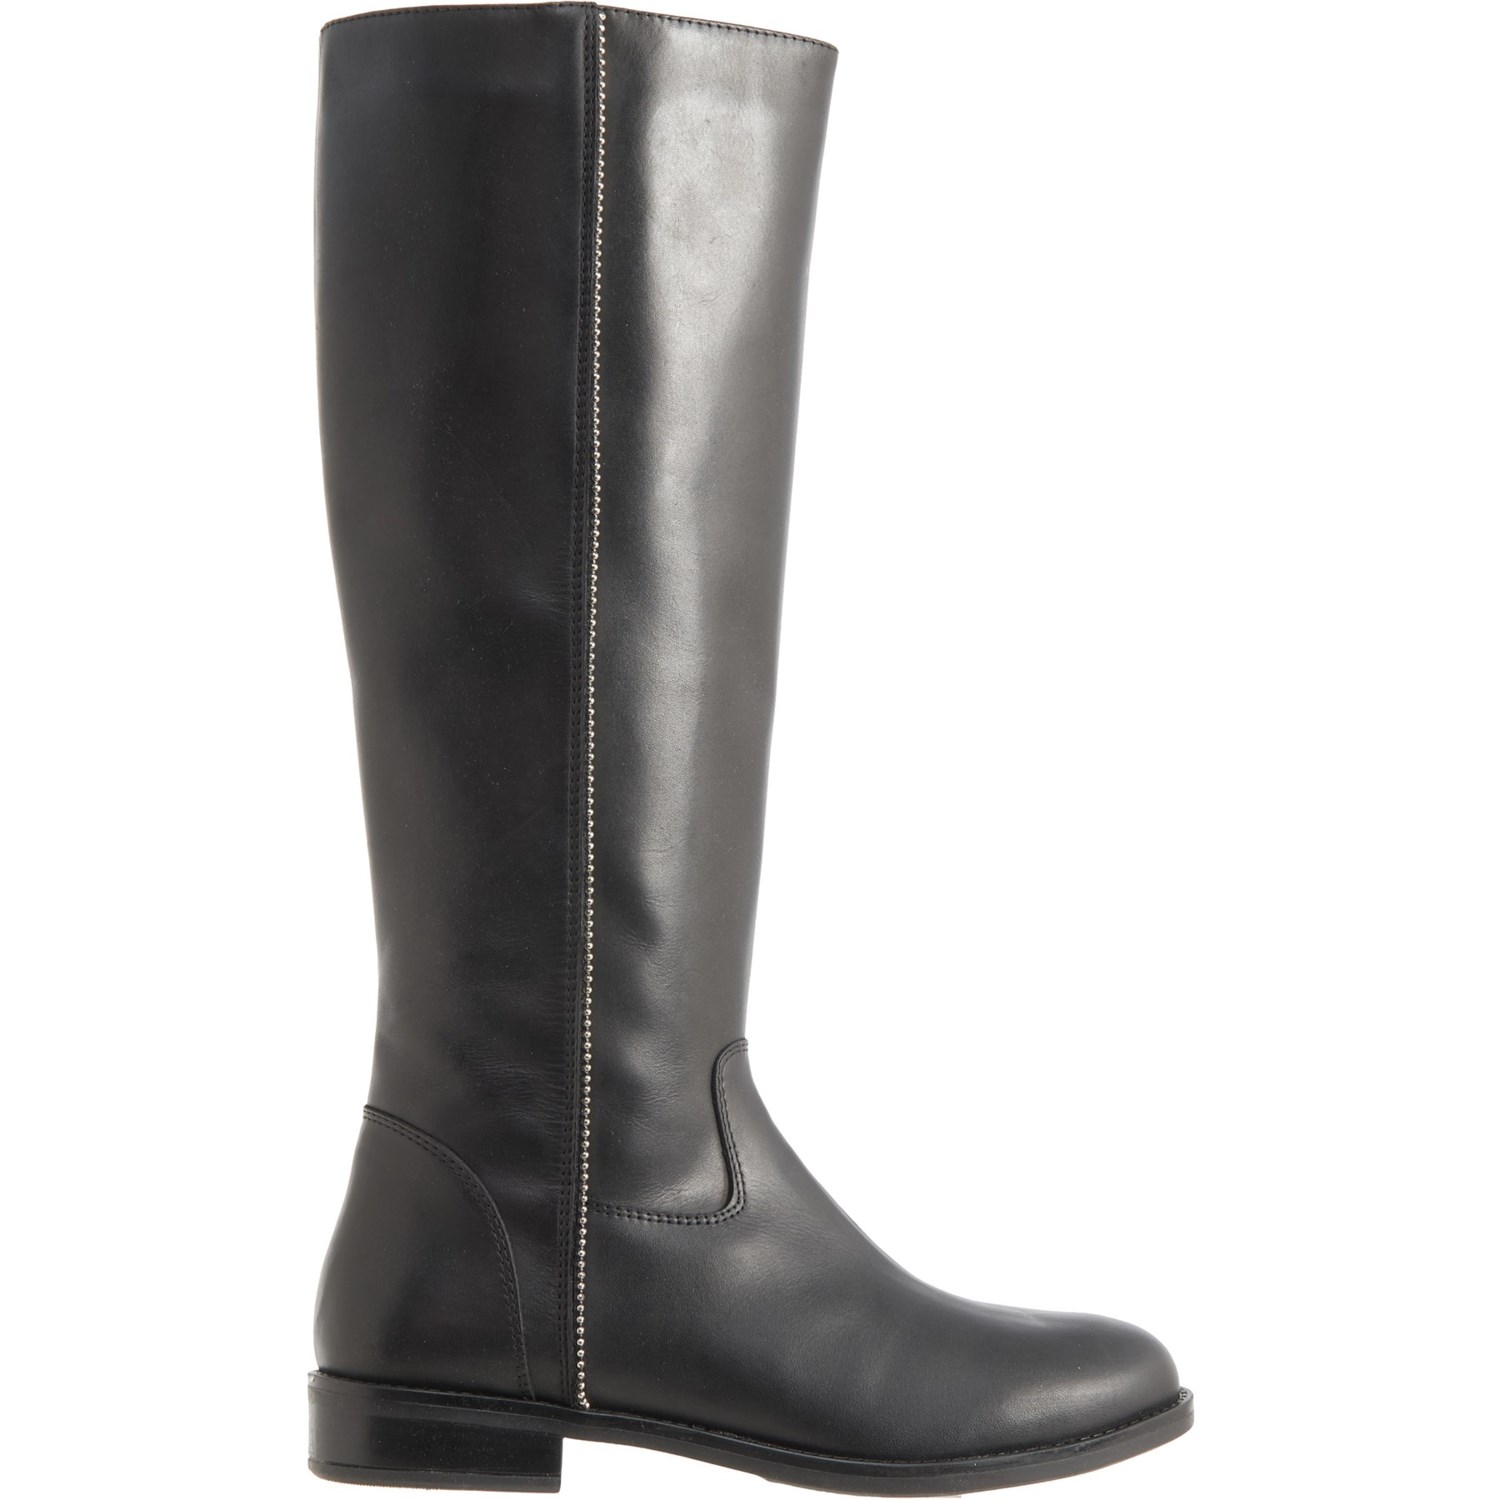 Italian Shoemakers Palmie Tall Boots (For Women) - Save 29%